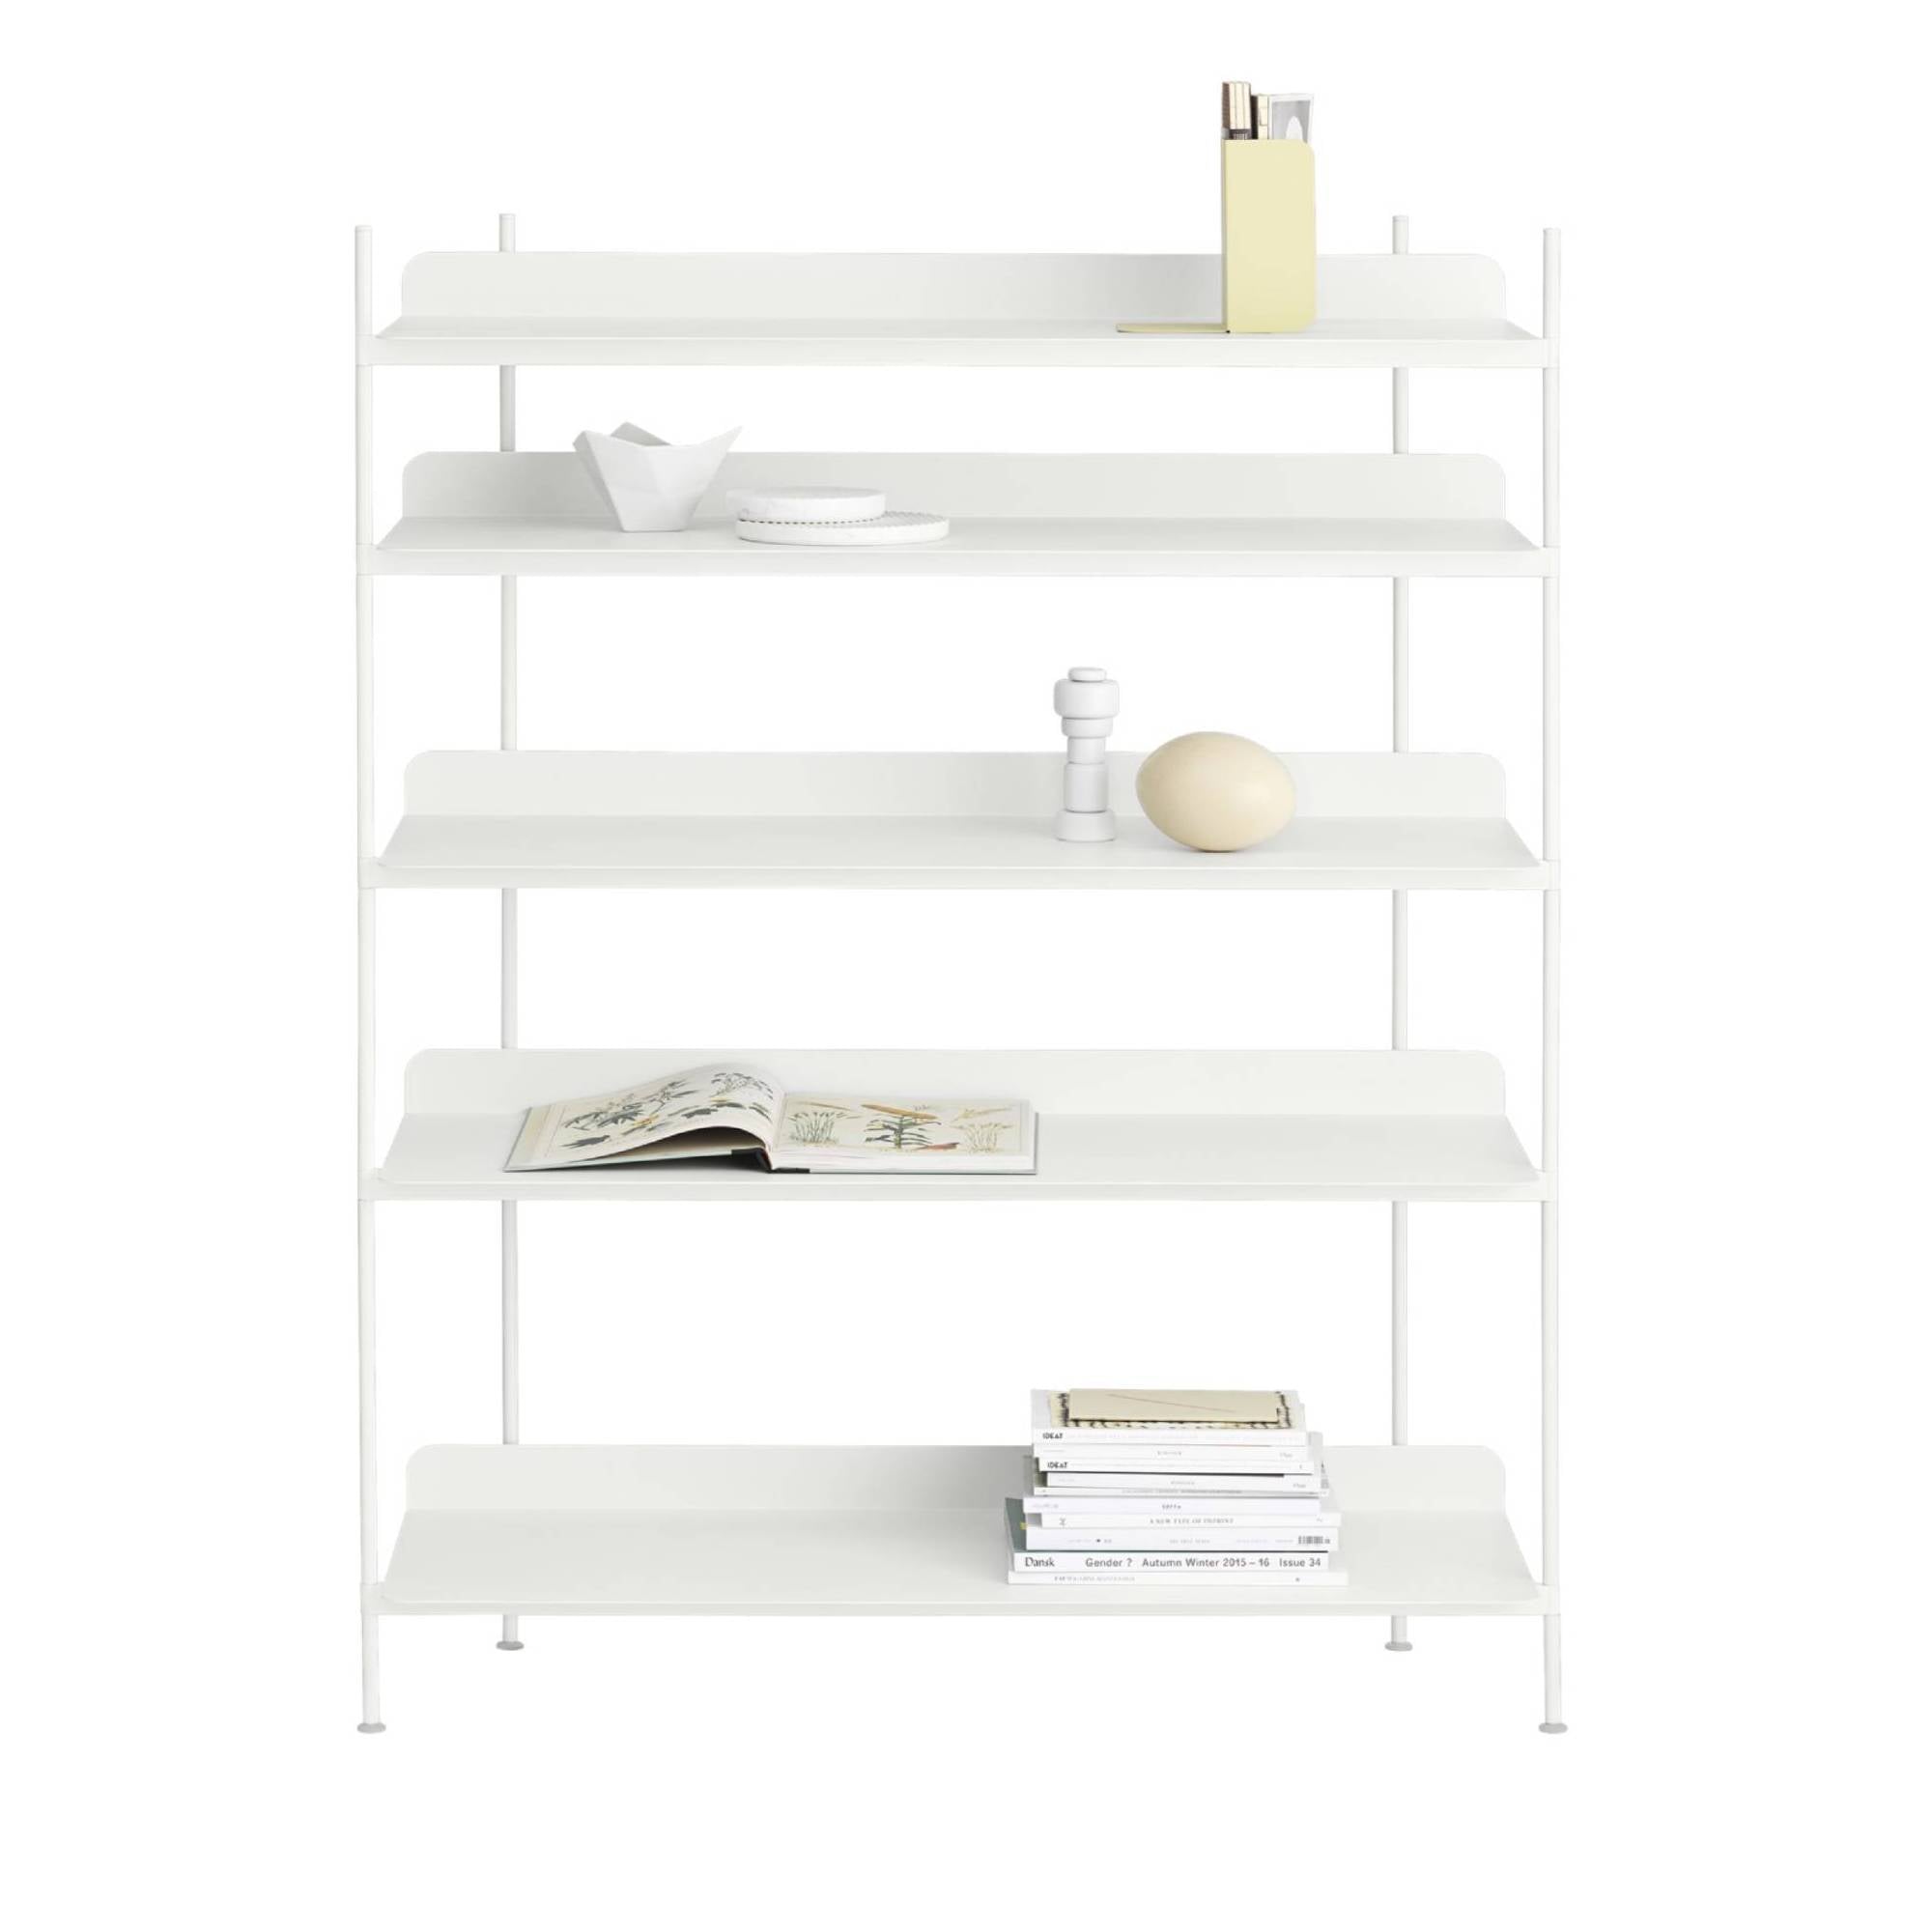 Compile Shelving System: Configuration 3 + White